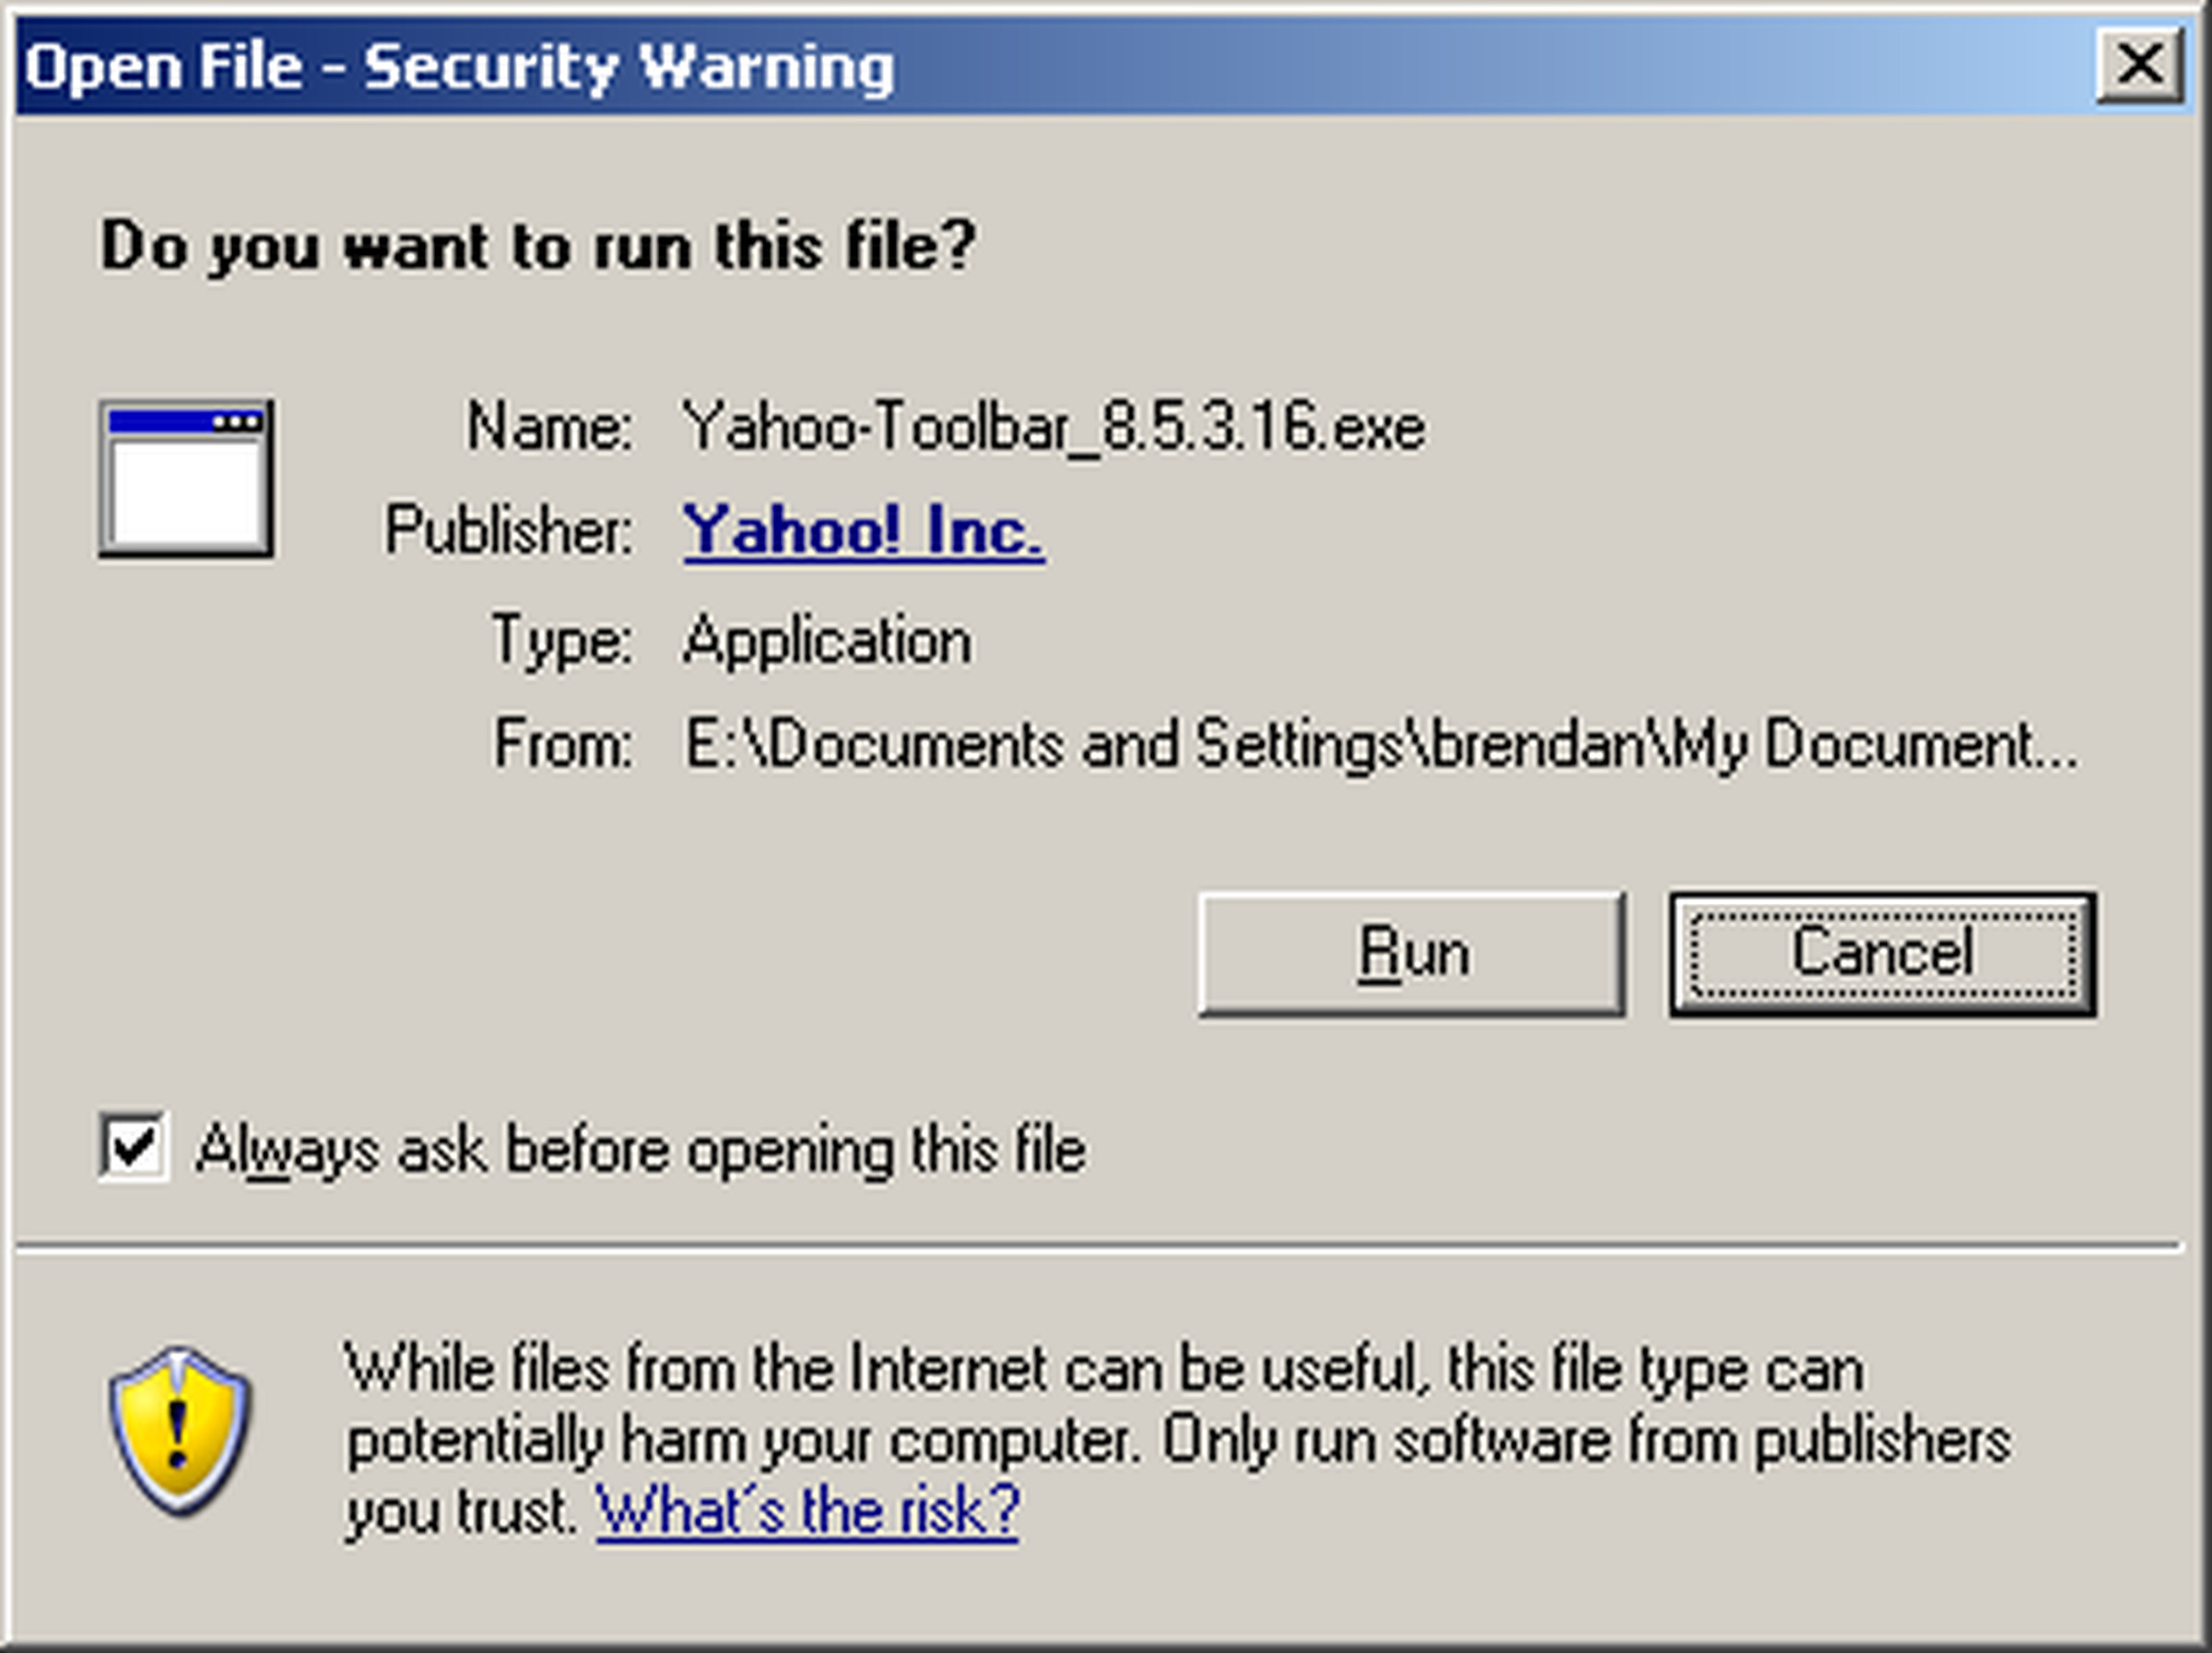 I don’t think I’ve ever opened this installer myself, and I shudder thinking about everyone who has. Let’s carry on.